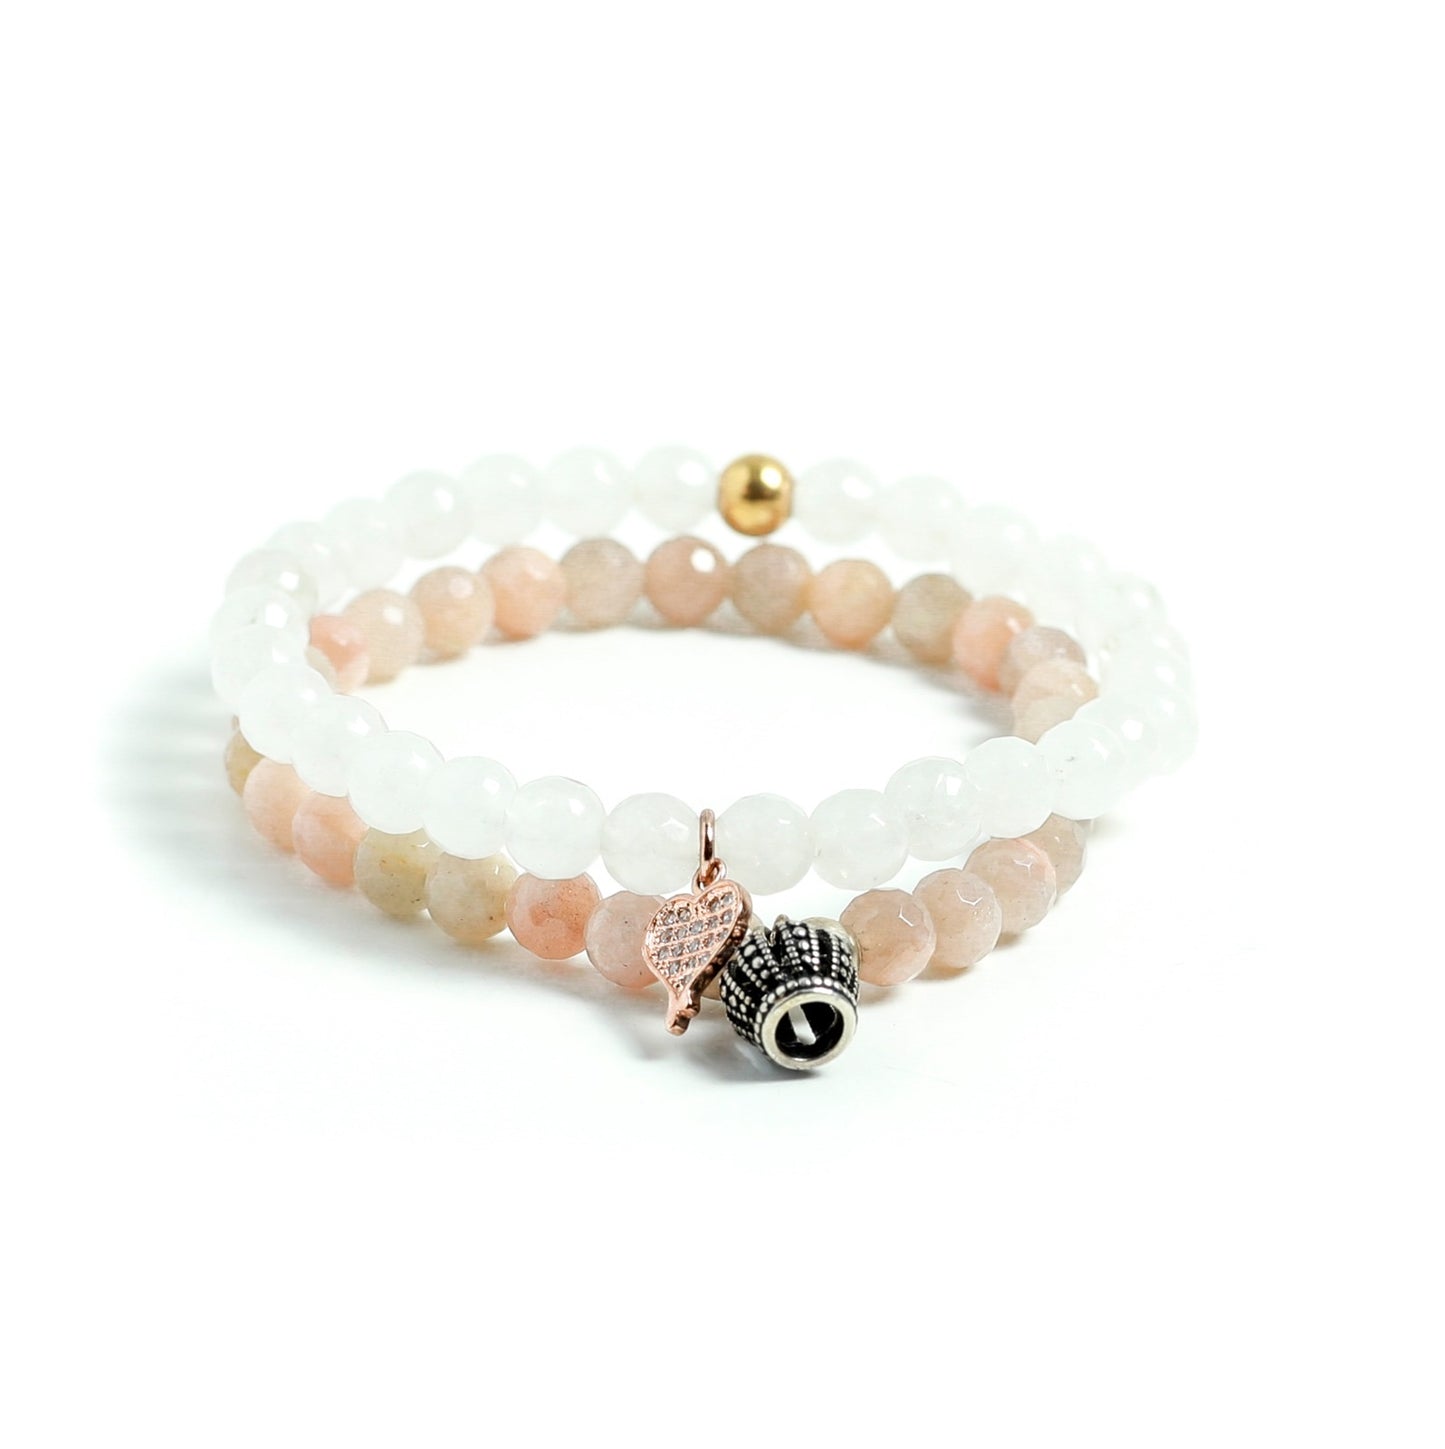 Womens Moonstone and Jade Beaded Bracelet Set with silver charms at RM KANDY